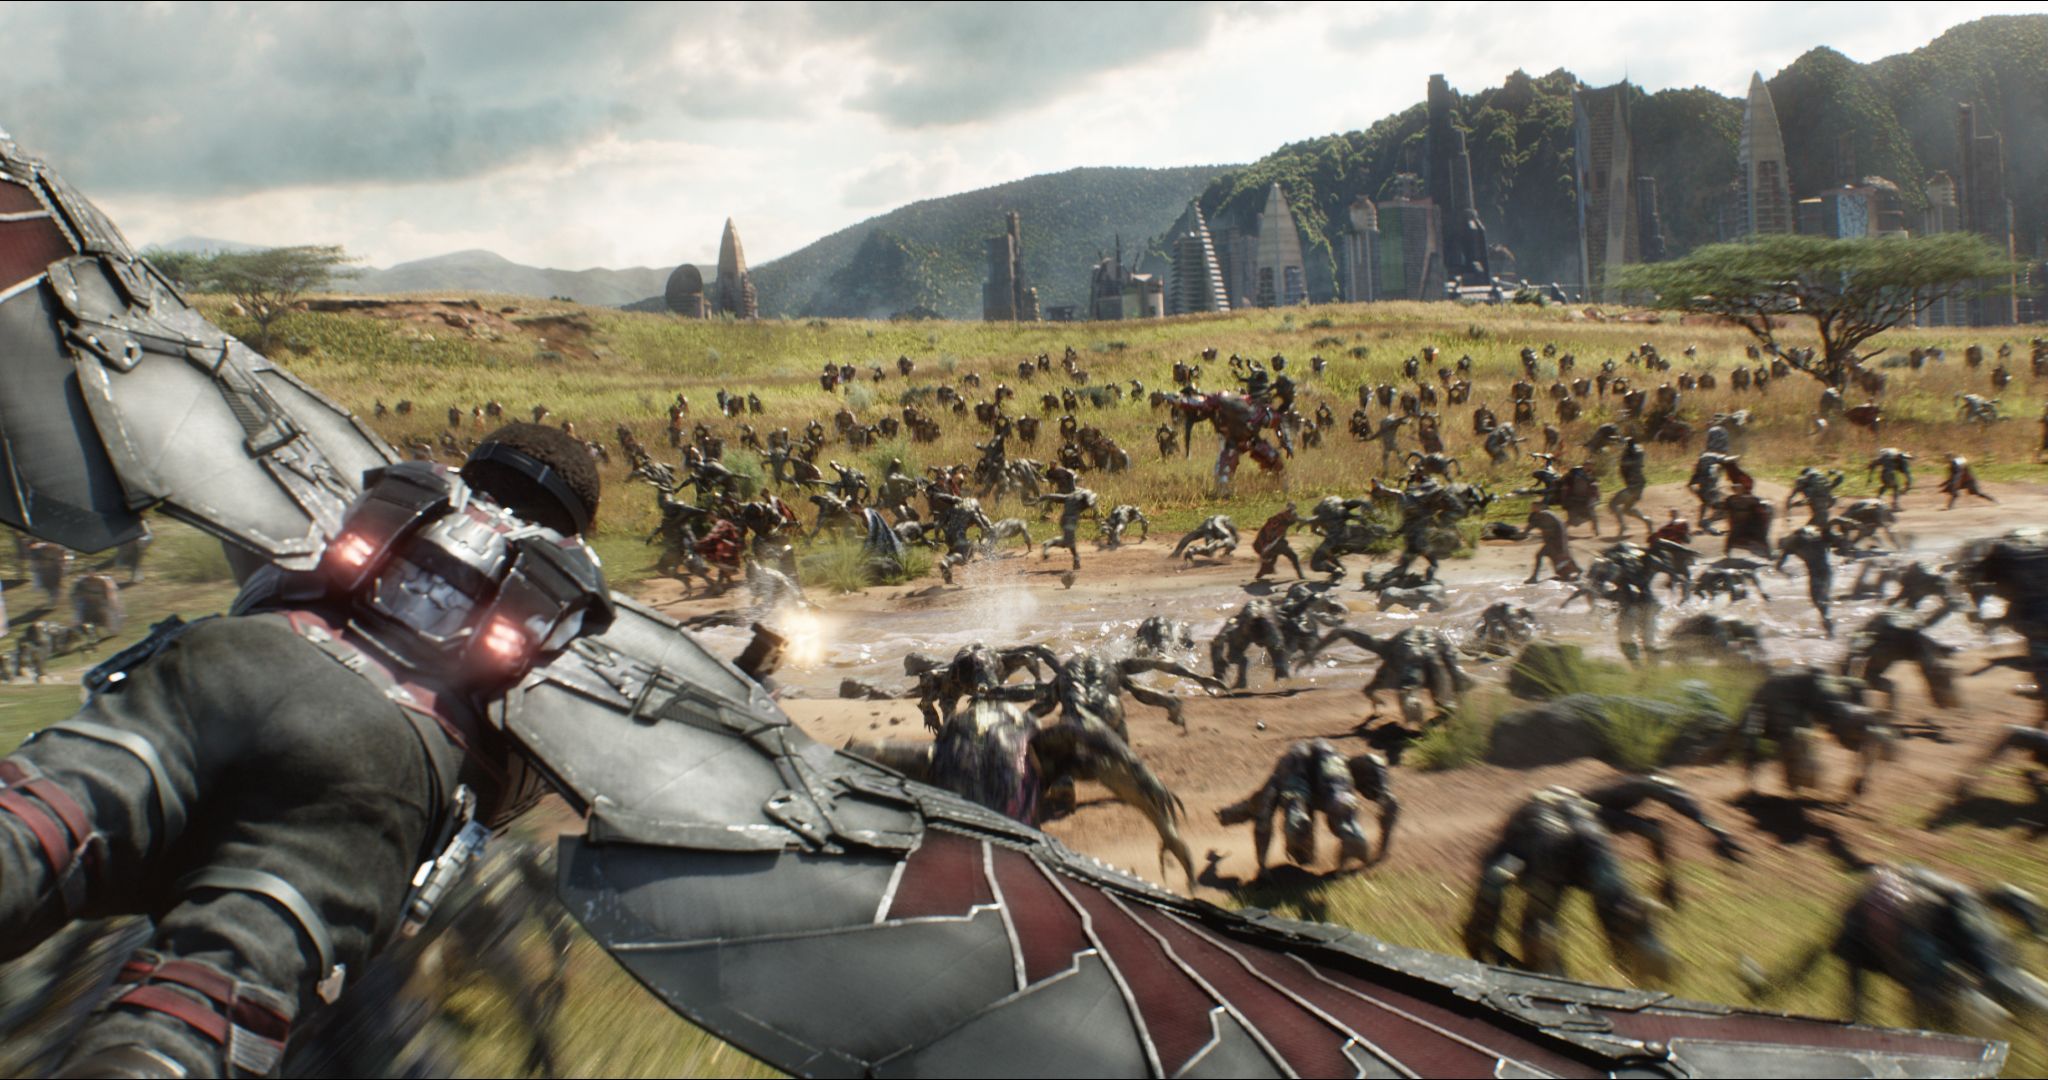 Falcon flies over Avengers Infinity War Wakanda Battle with Outriders